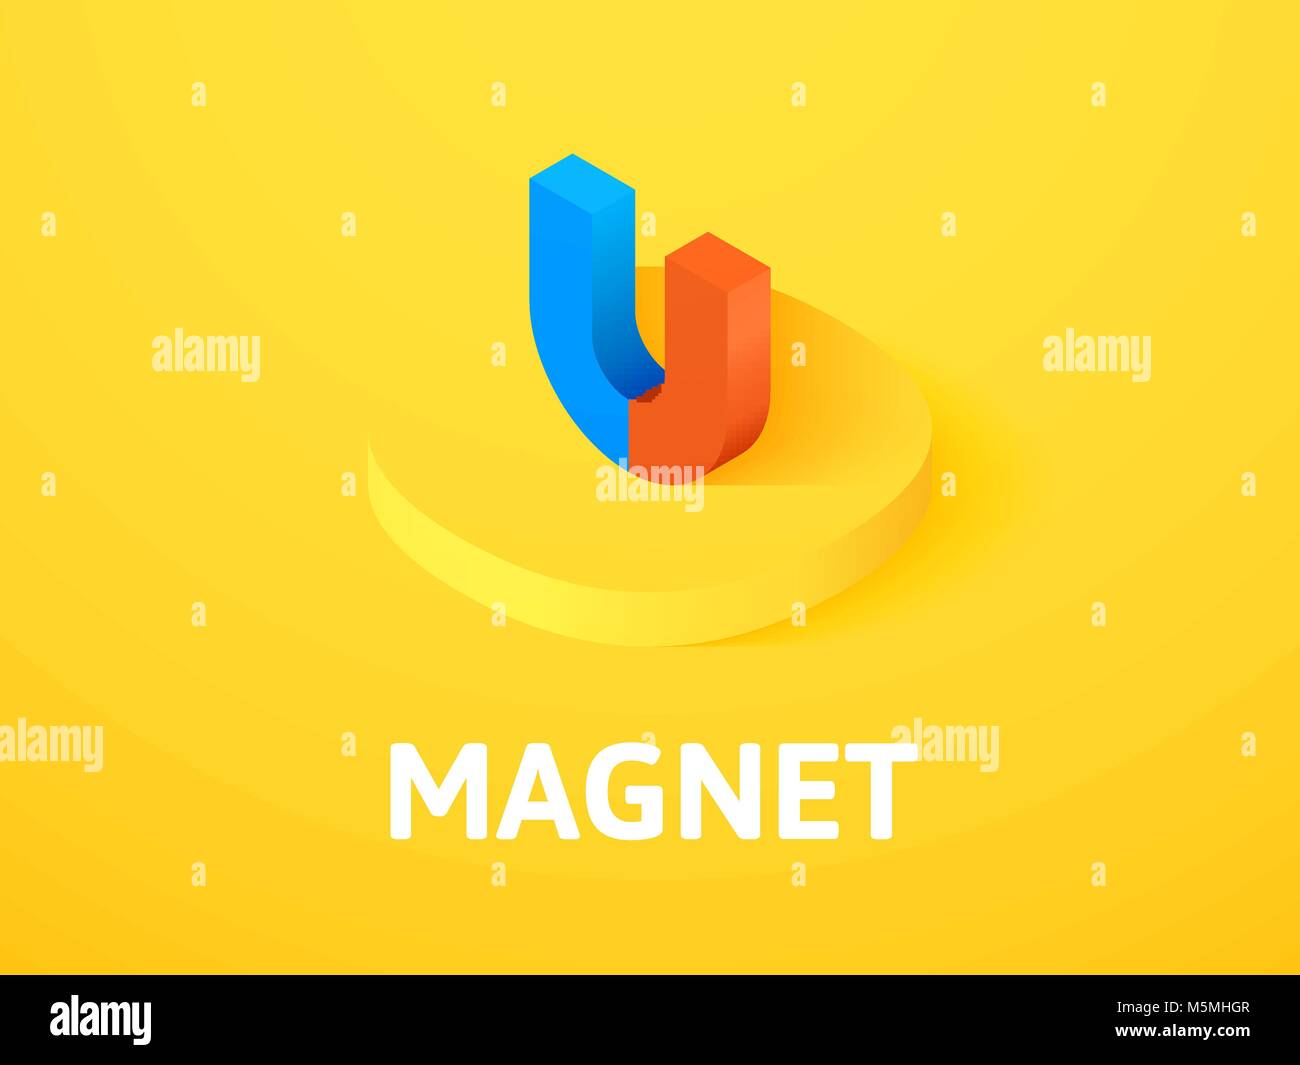 Magnet isometric icon, isolated on color background Stock Vector